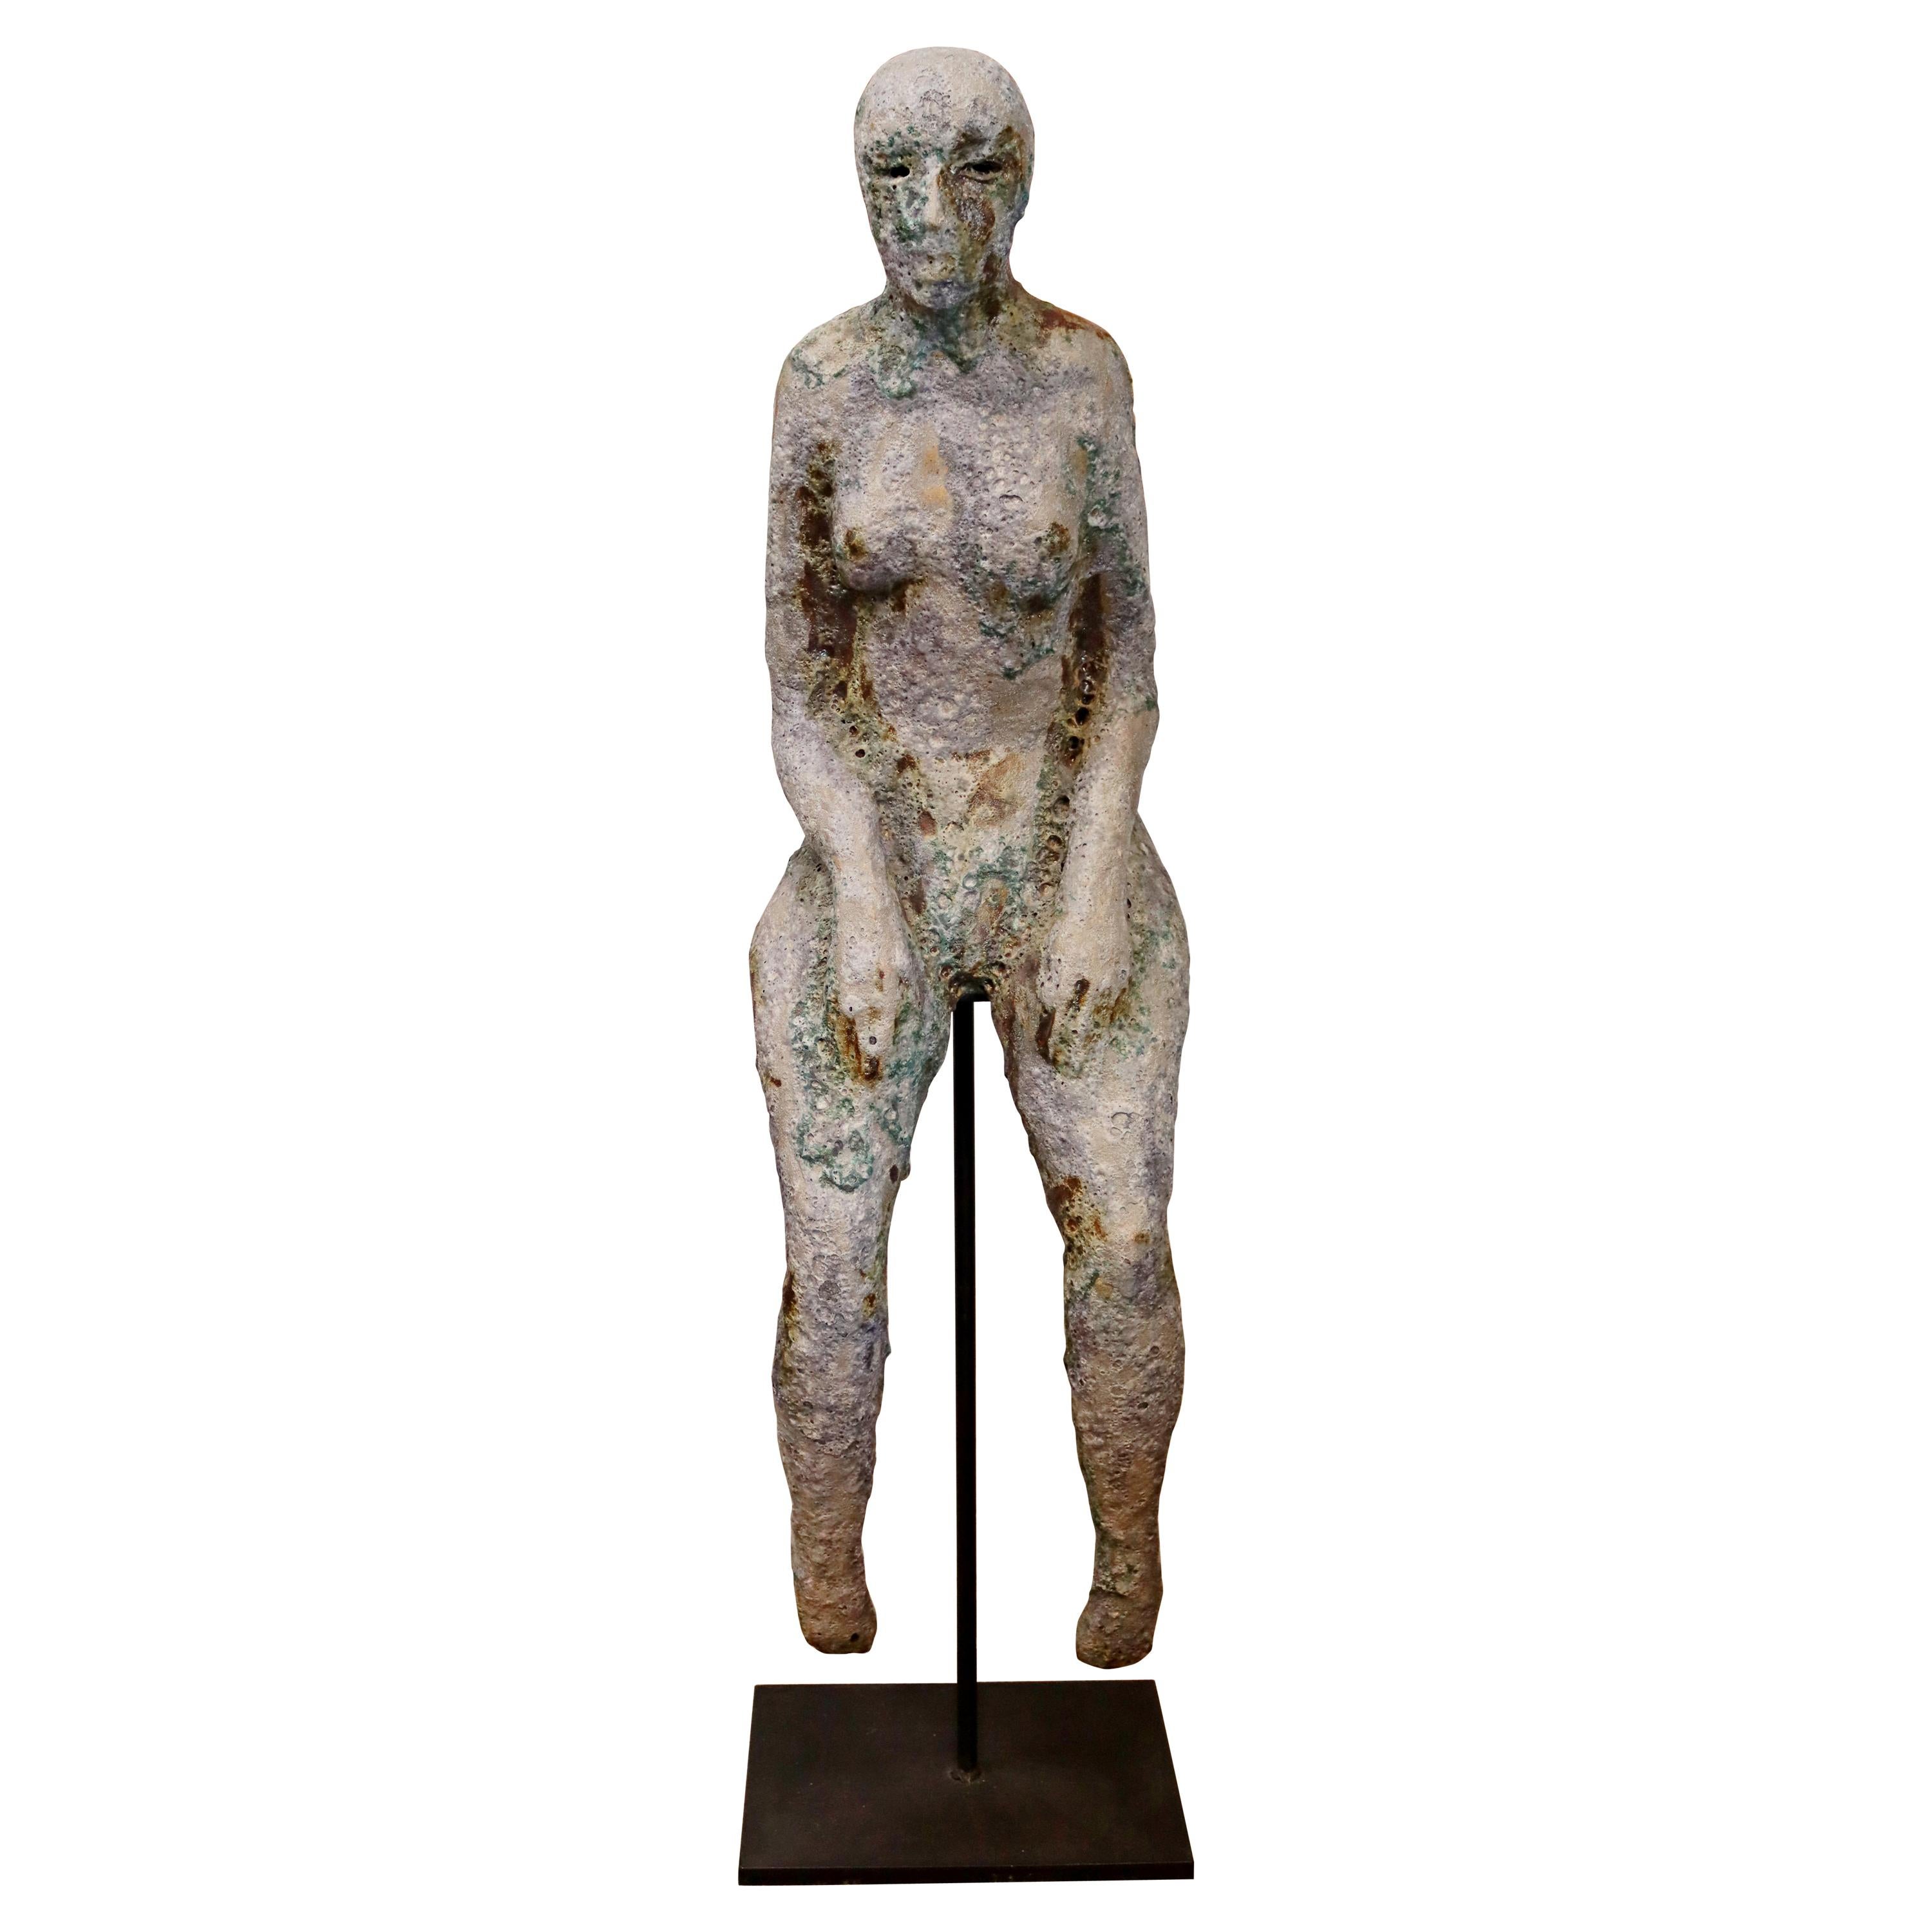 Contemporary Modern Mark Chatterley Large Ceramic Floor Sculpture Seated Figure